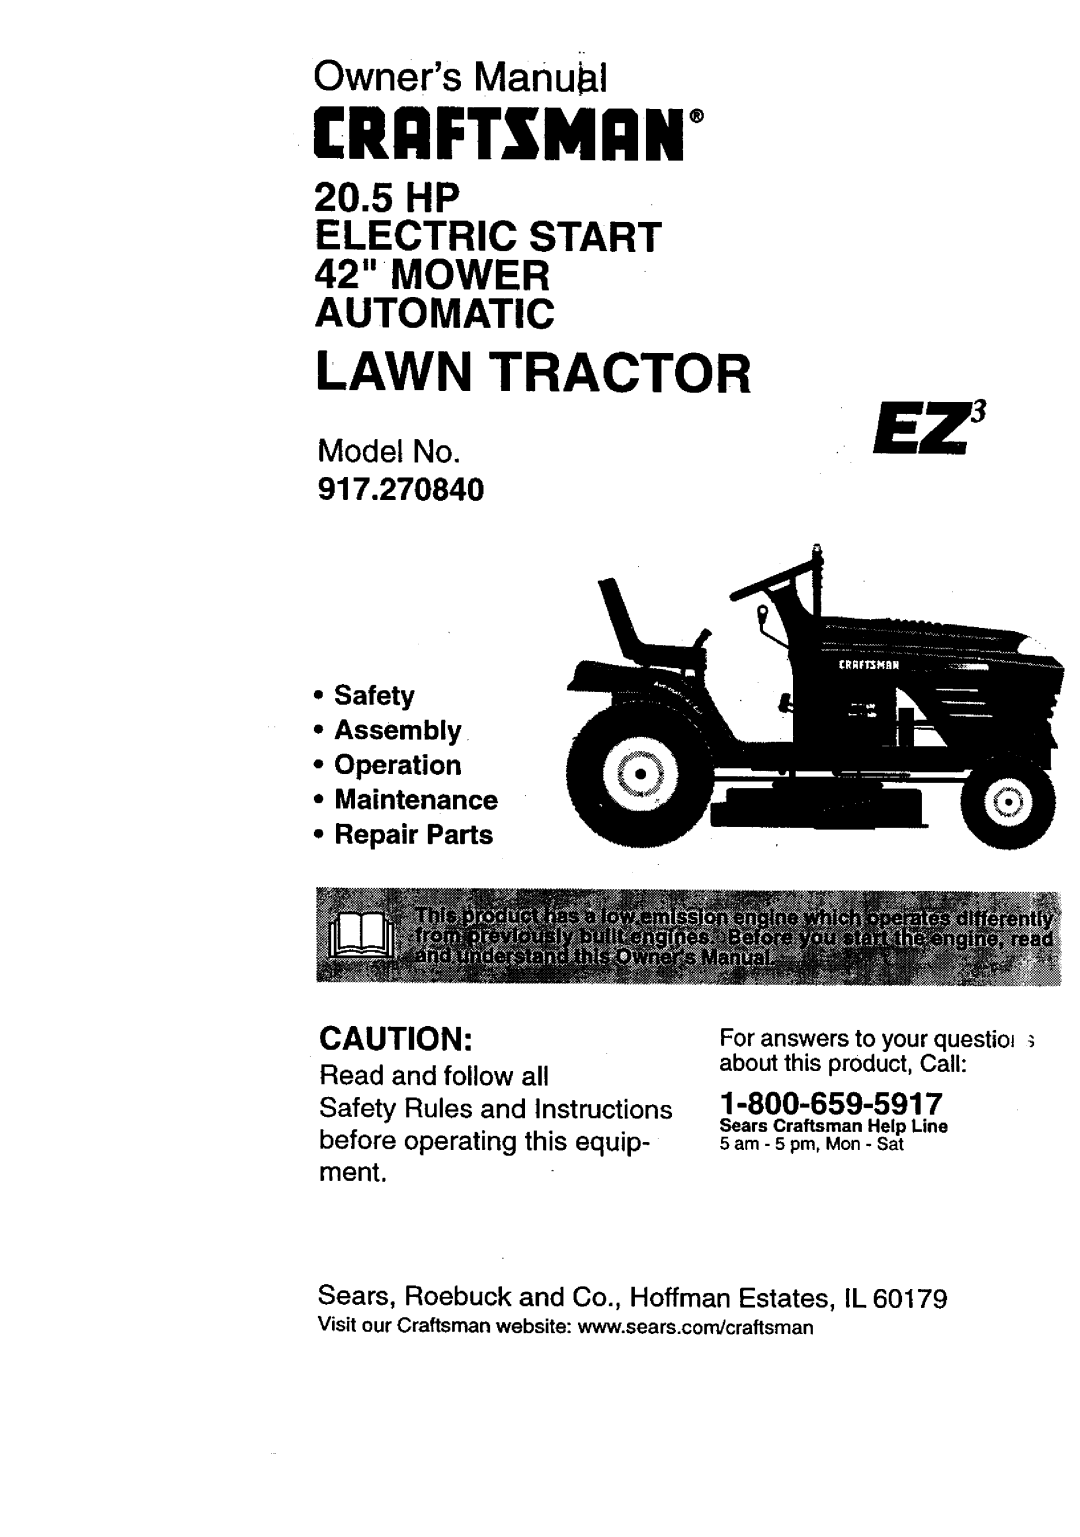 Craftsman 917.27084 manual Owners Manui l, 20.5HP ELECTRIC START 42 MOWER AUTOMATIC, Model No, 1-800-659-5917, Craftsman+ 